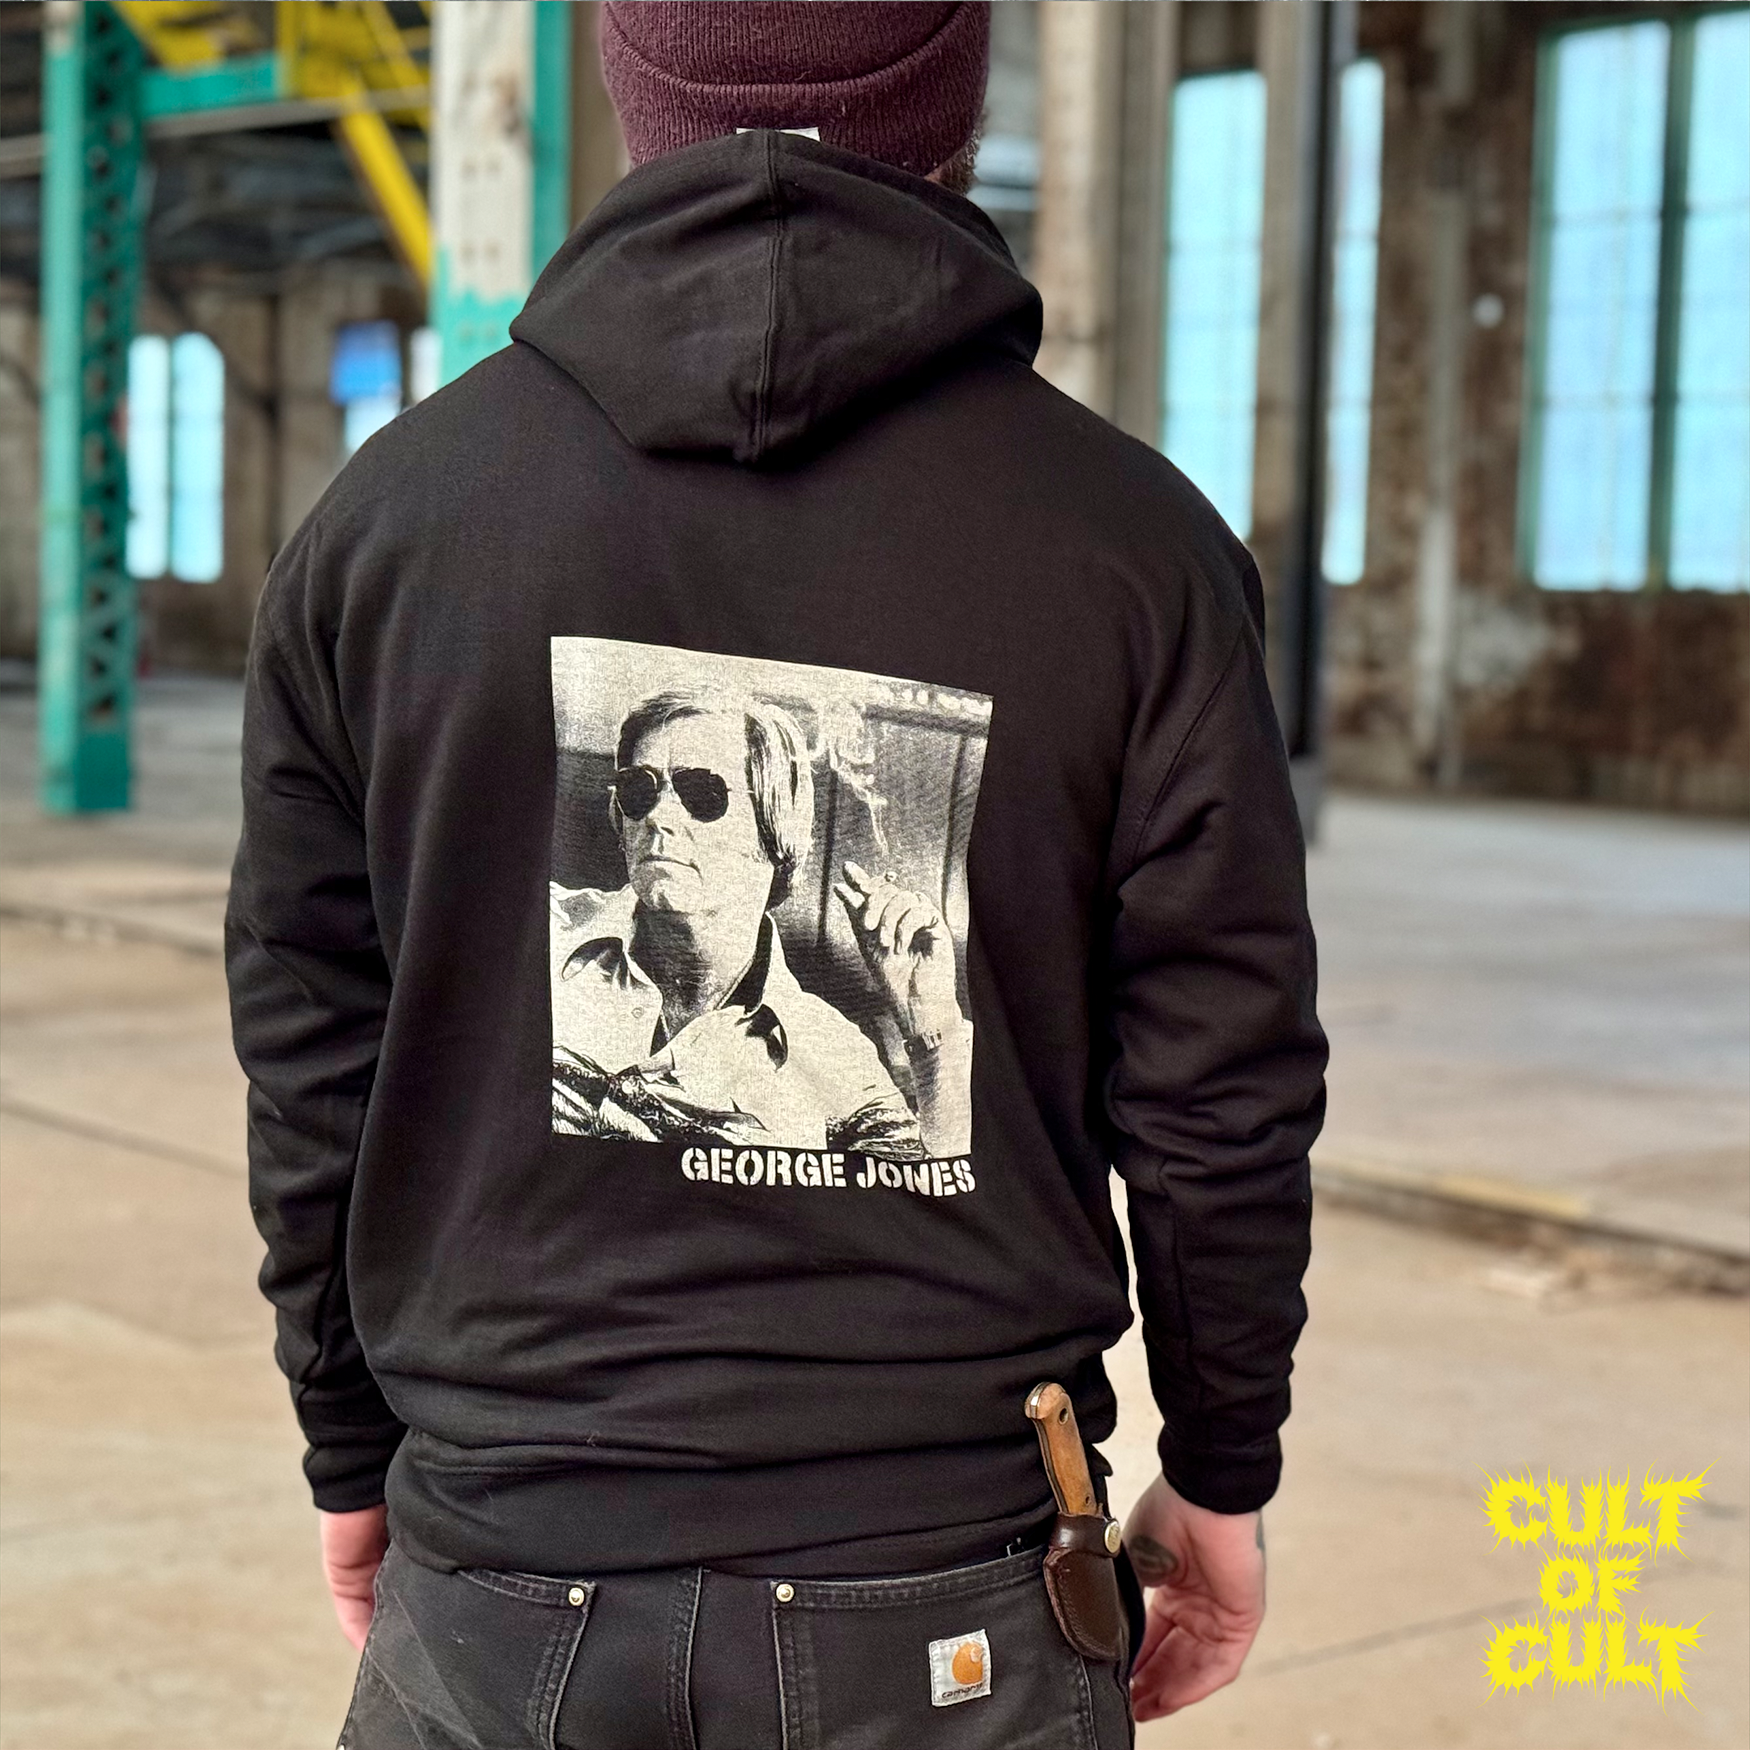 A model wearing the George Jones hoodie, pictured from the back.